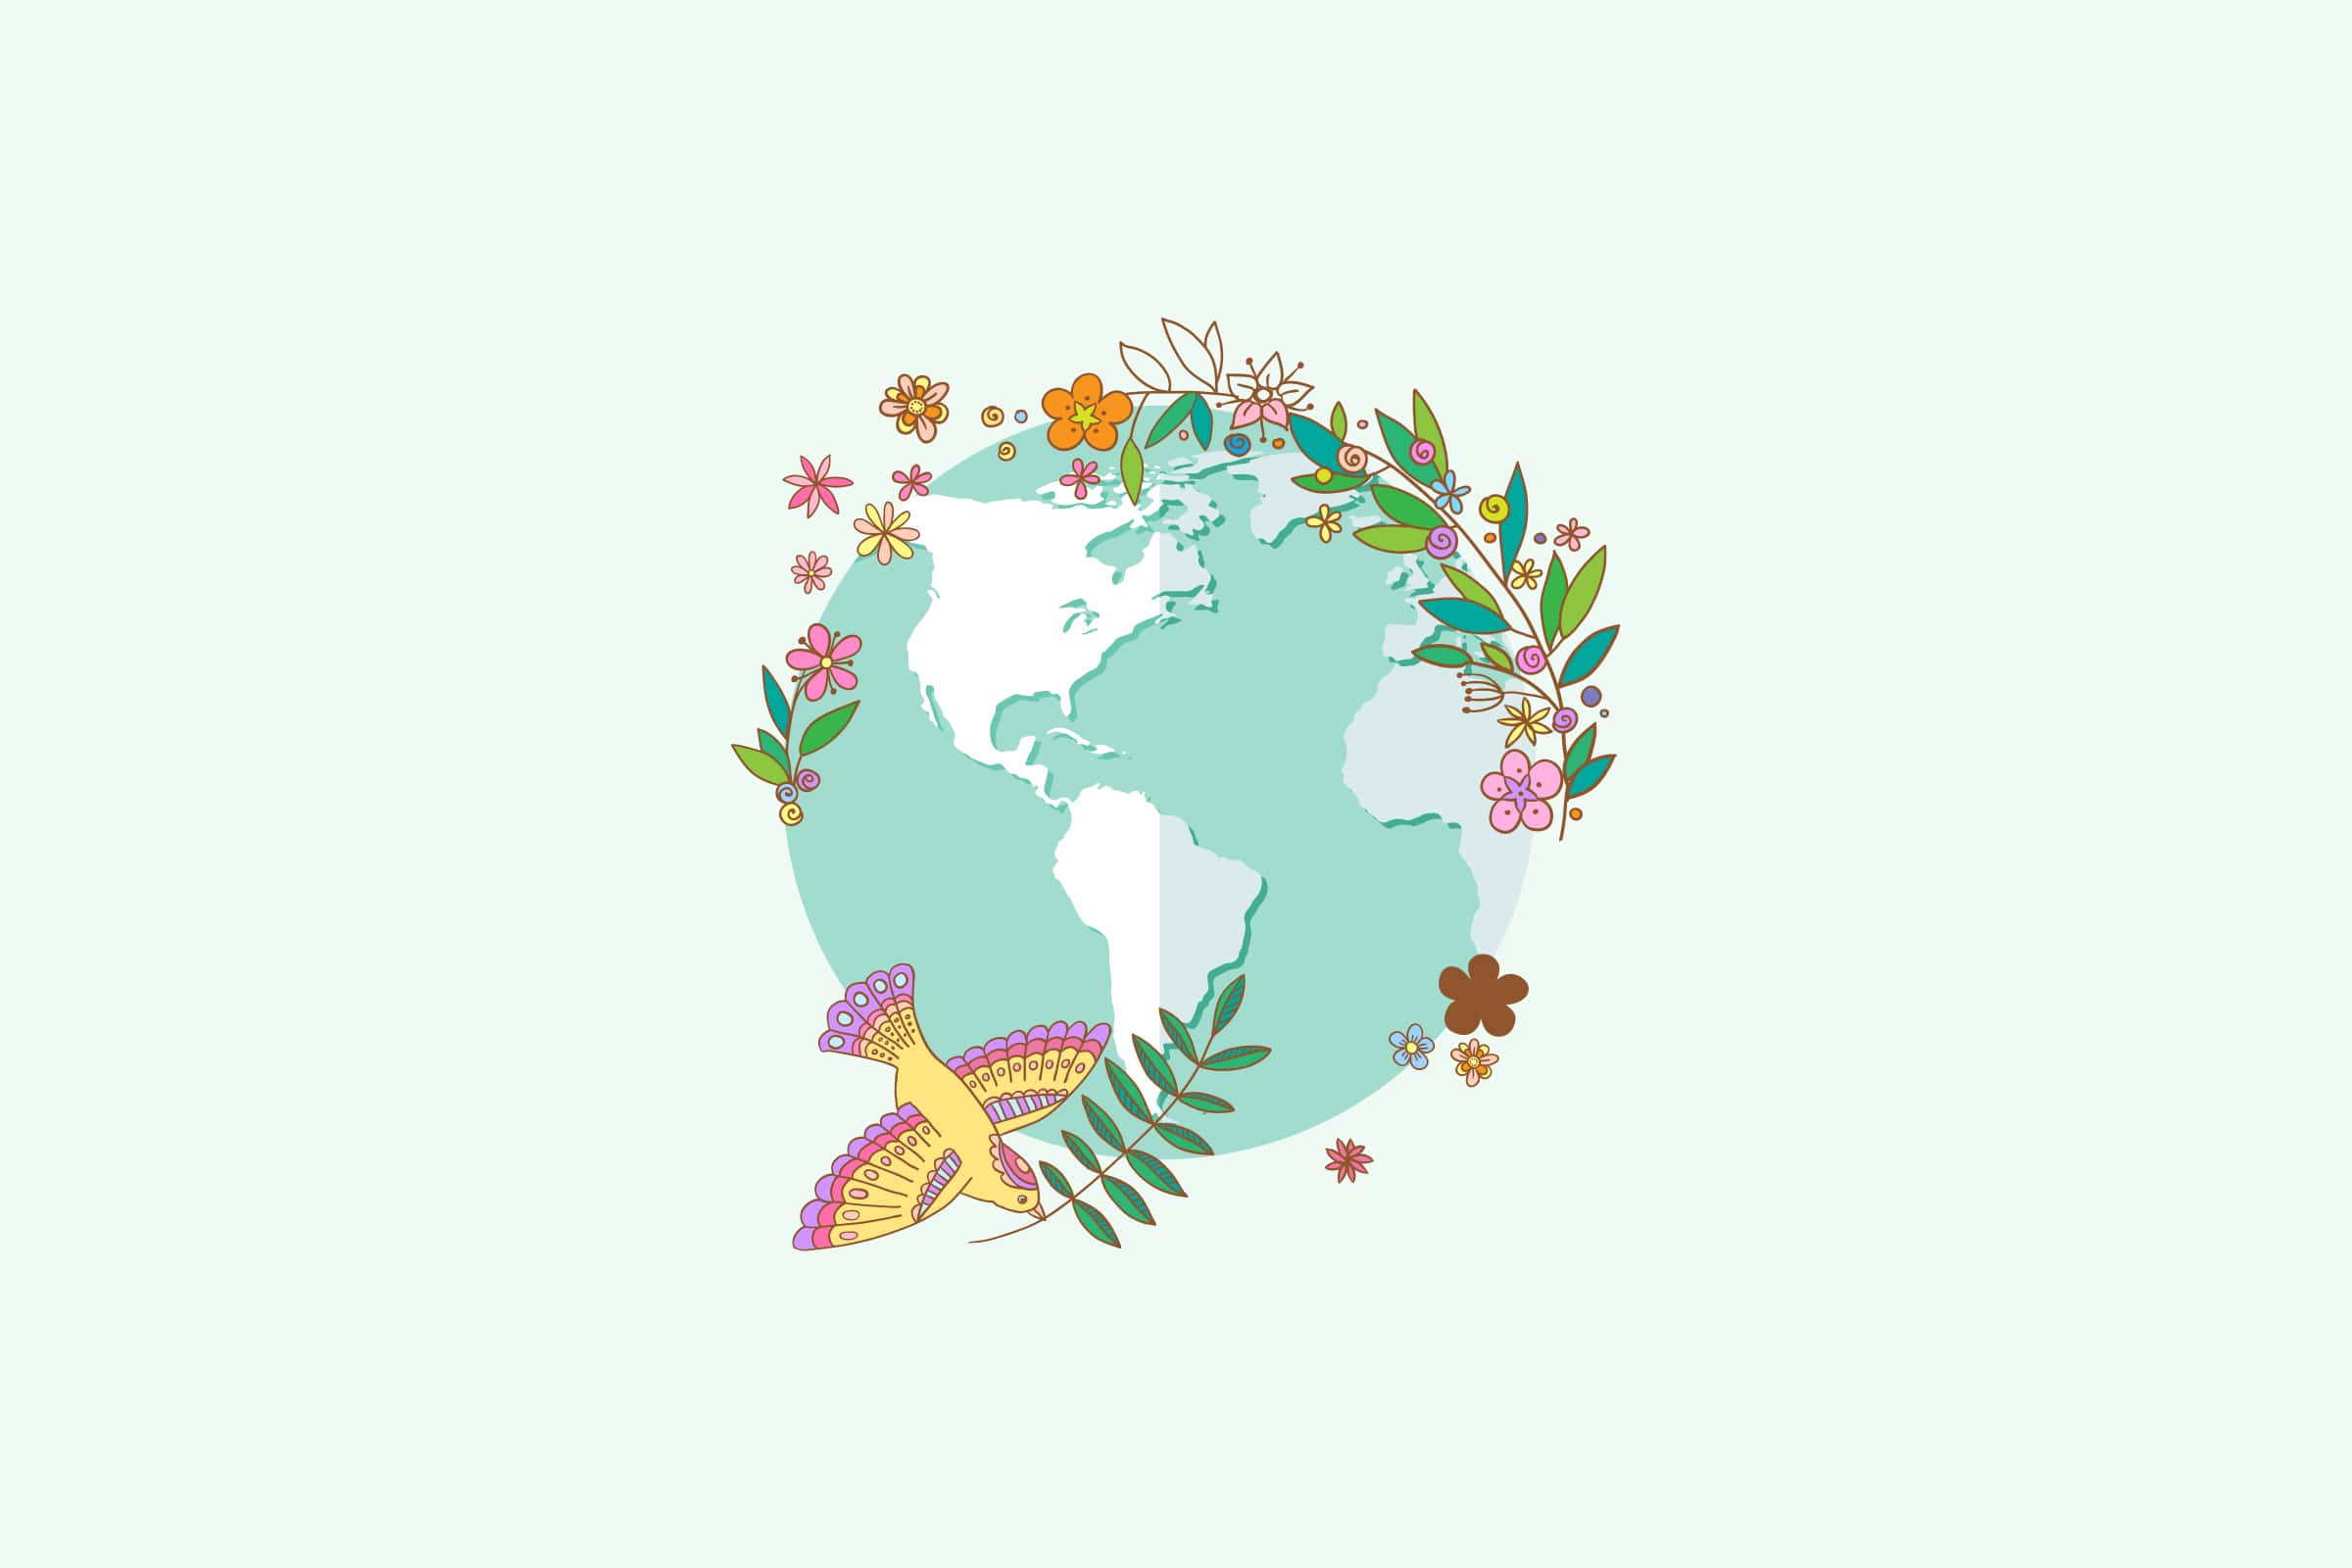 Countries and their national flowers